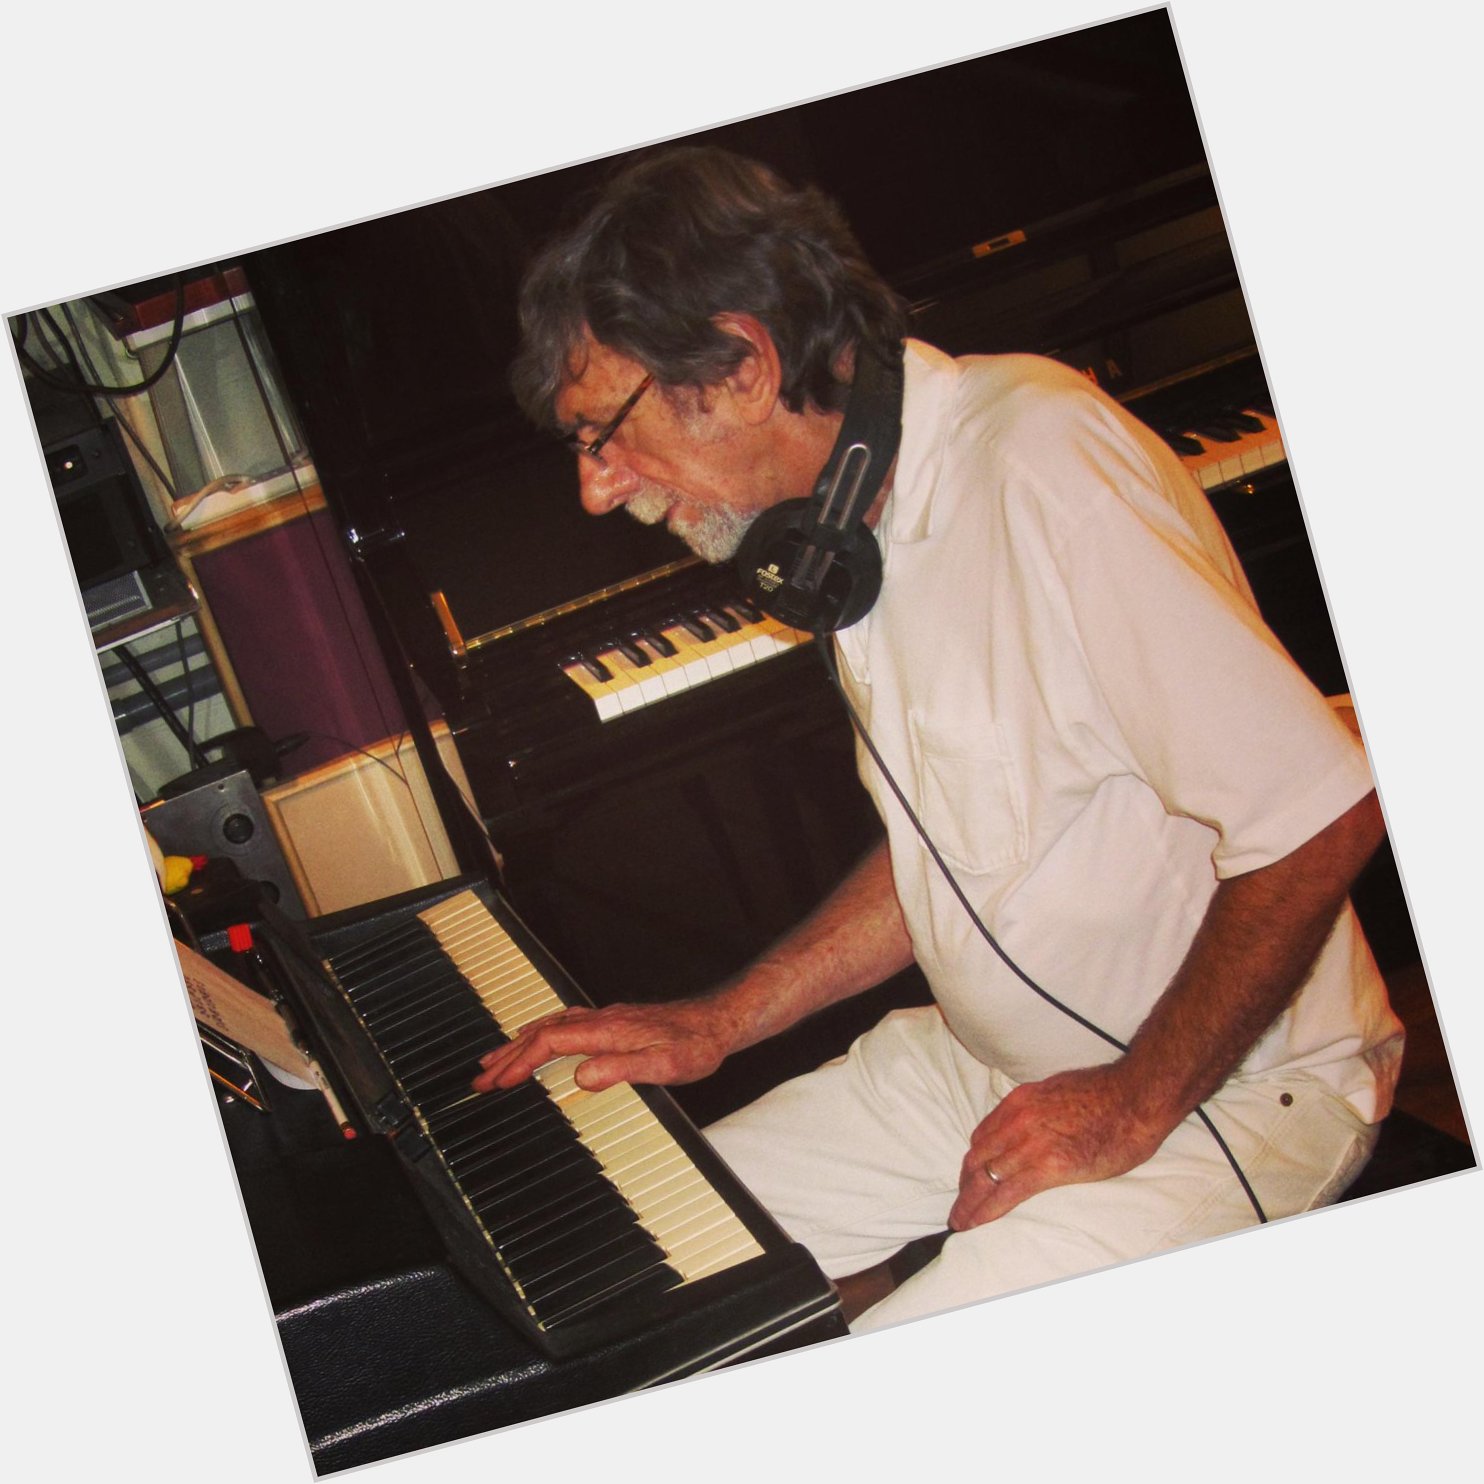 June 14th Happy 72nd Birthday to R&R HOF organist Spooner Oldham who played in The Muscle Shoals Rhythm Section 